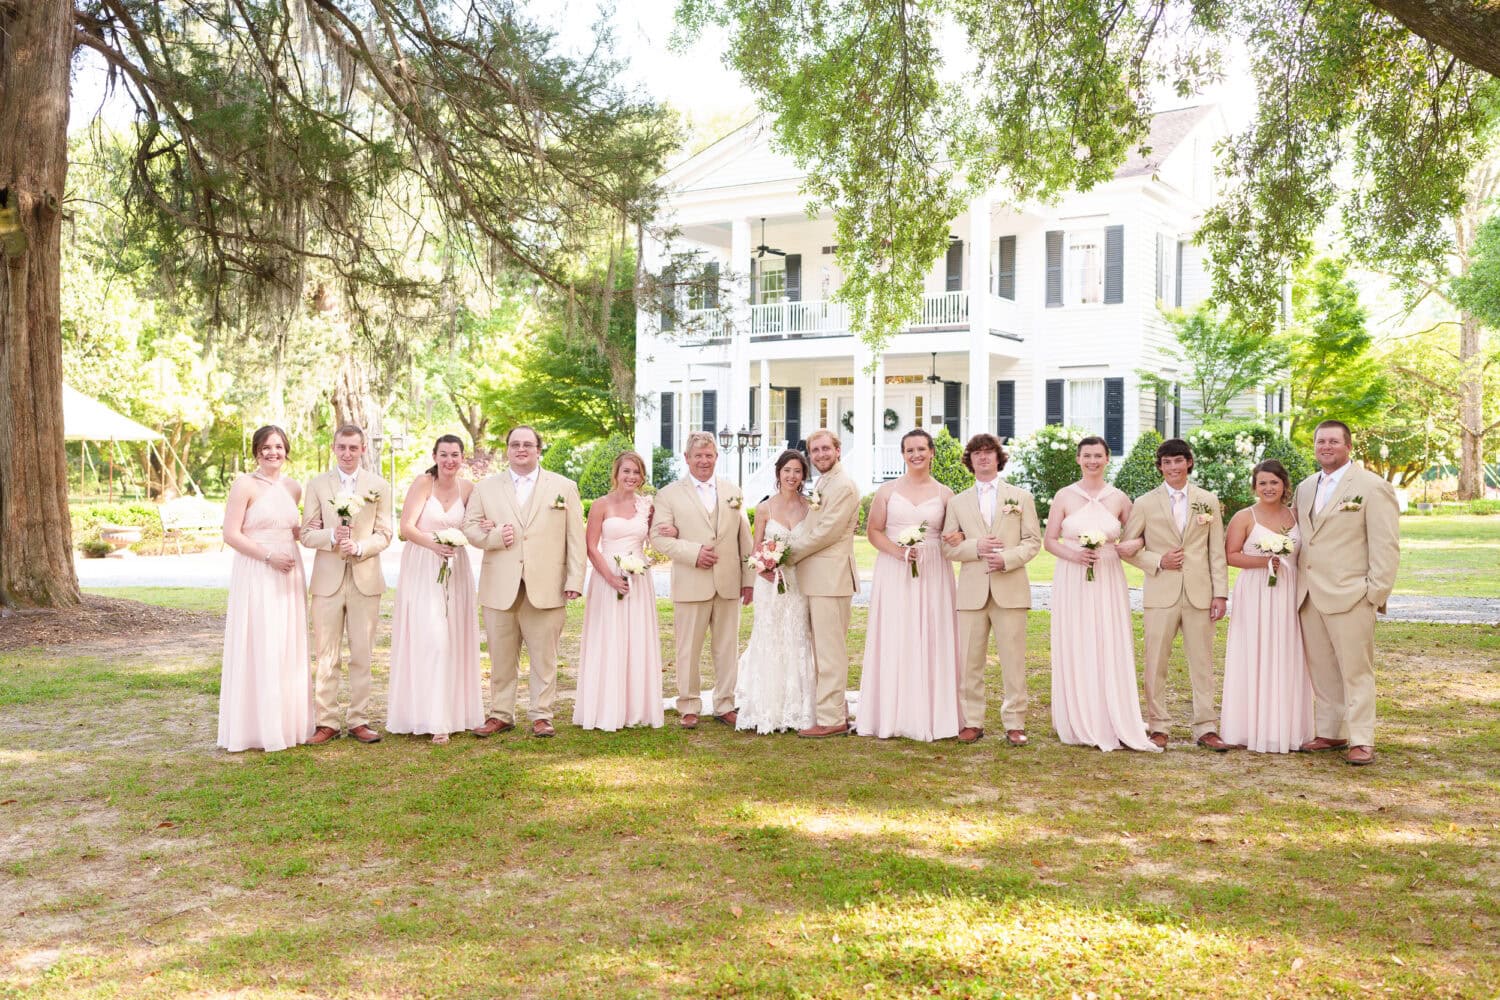 Wedding party with guys and girls grouped together in front of the hose - Tanglewood Plantation